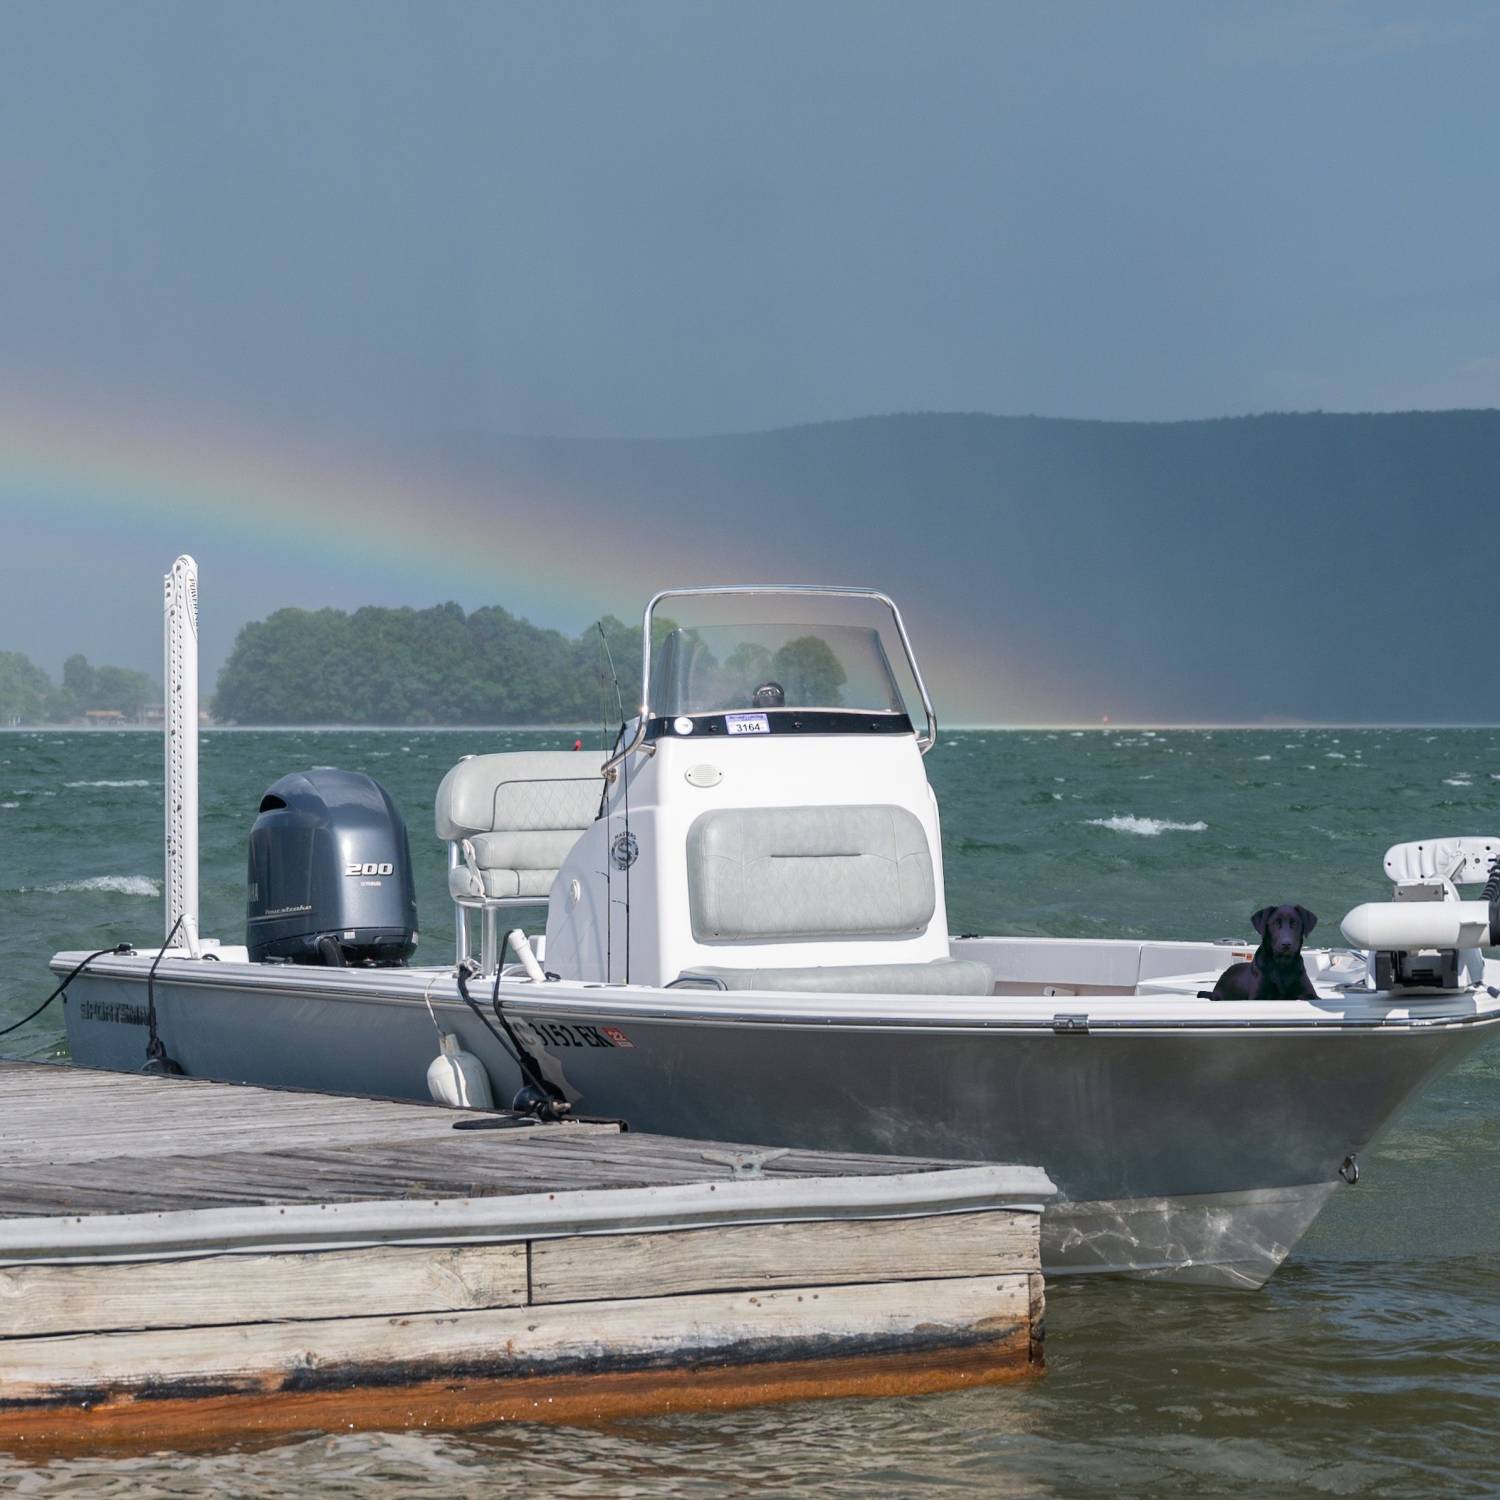 Storm rolled in with a rainbow so I got preacher to stay on the boat while I snapped a couple p...